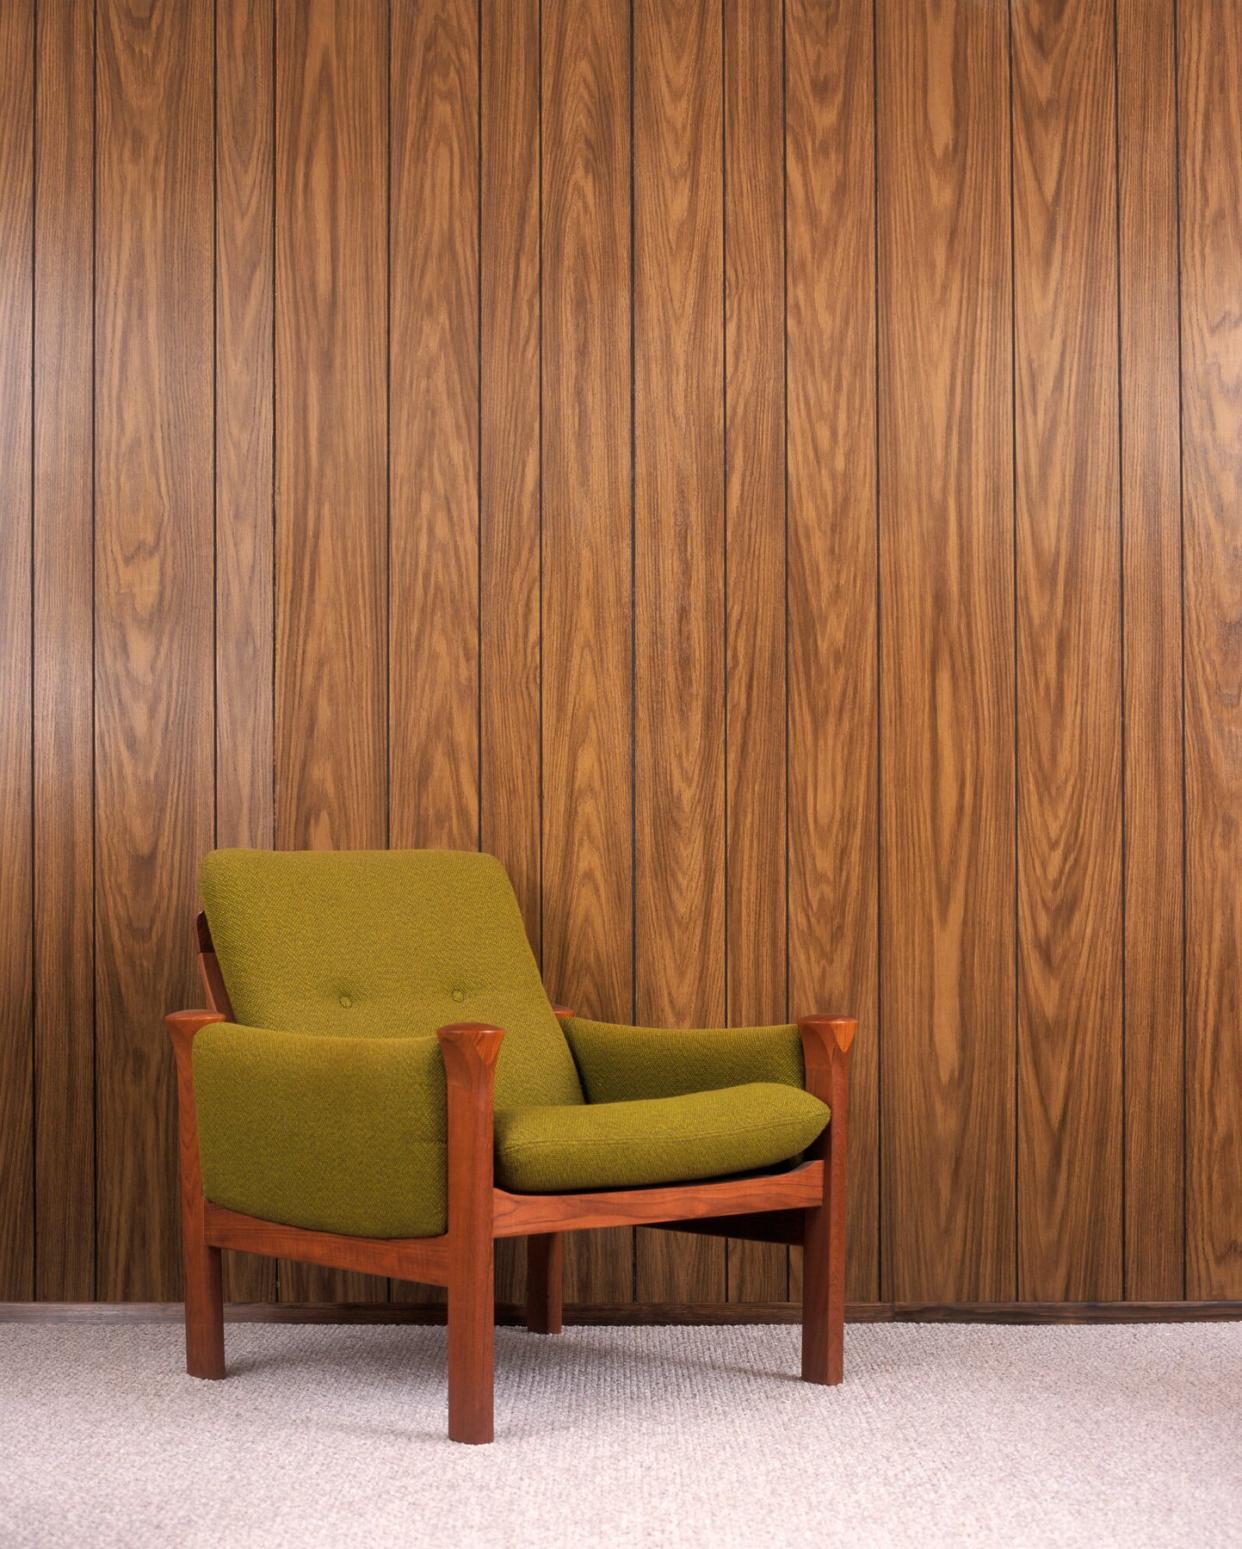 Chair in front of wood paneling